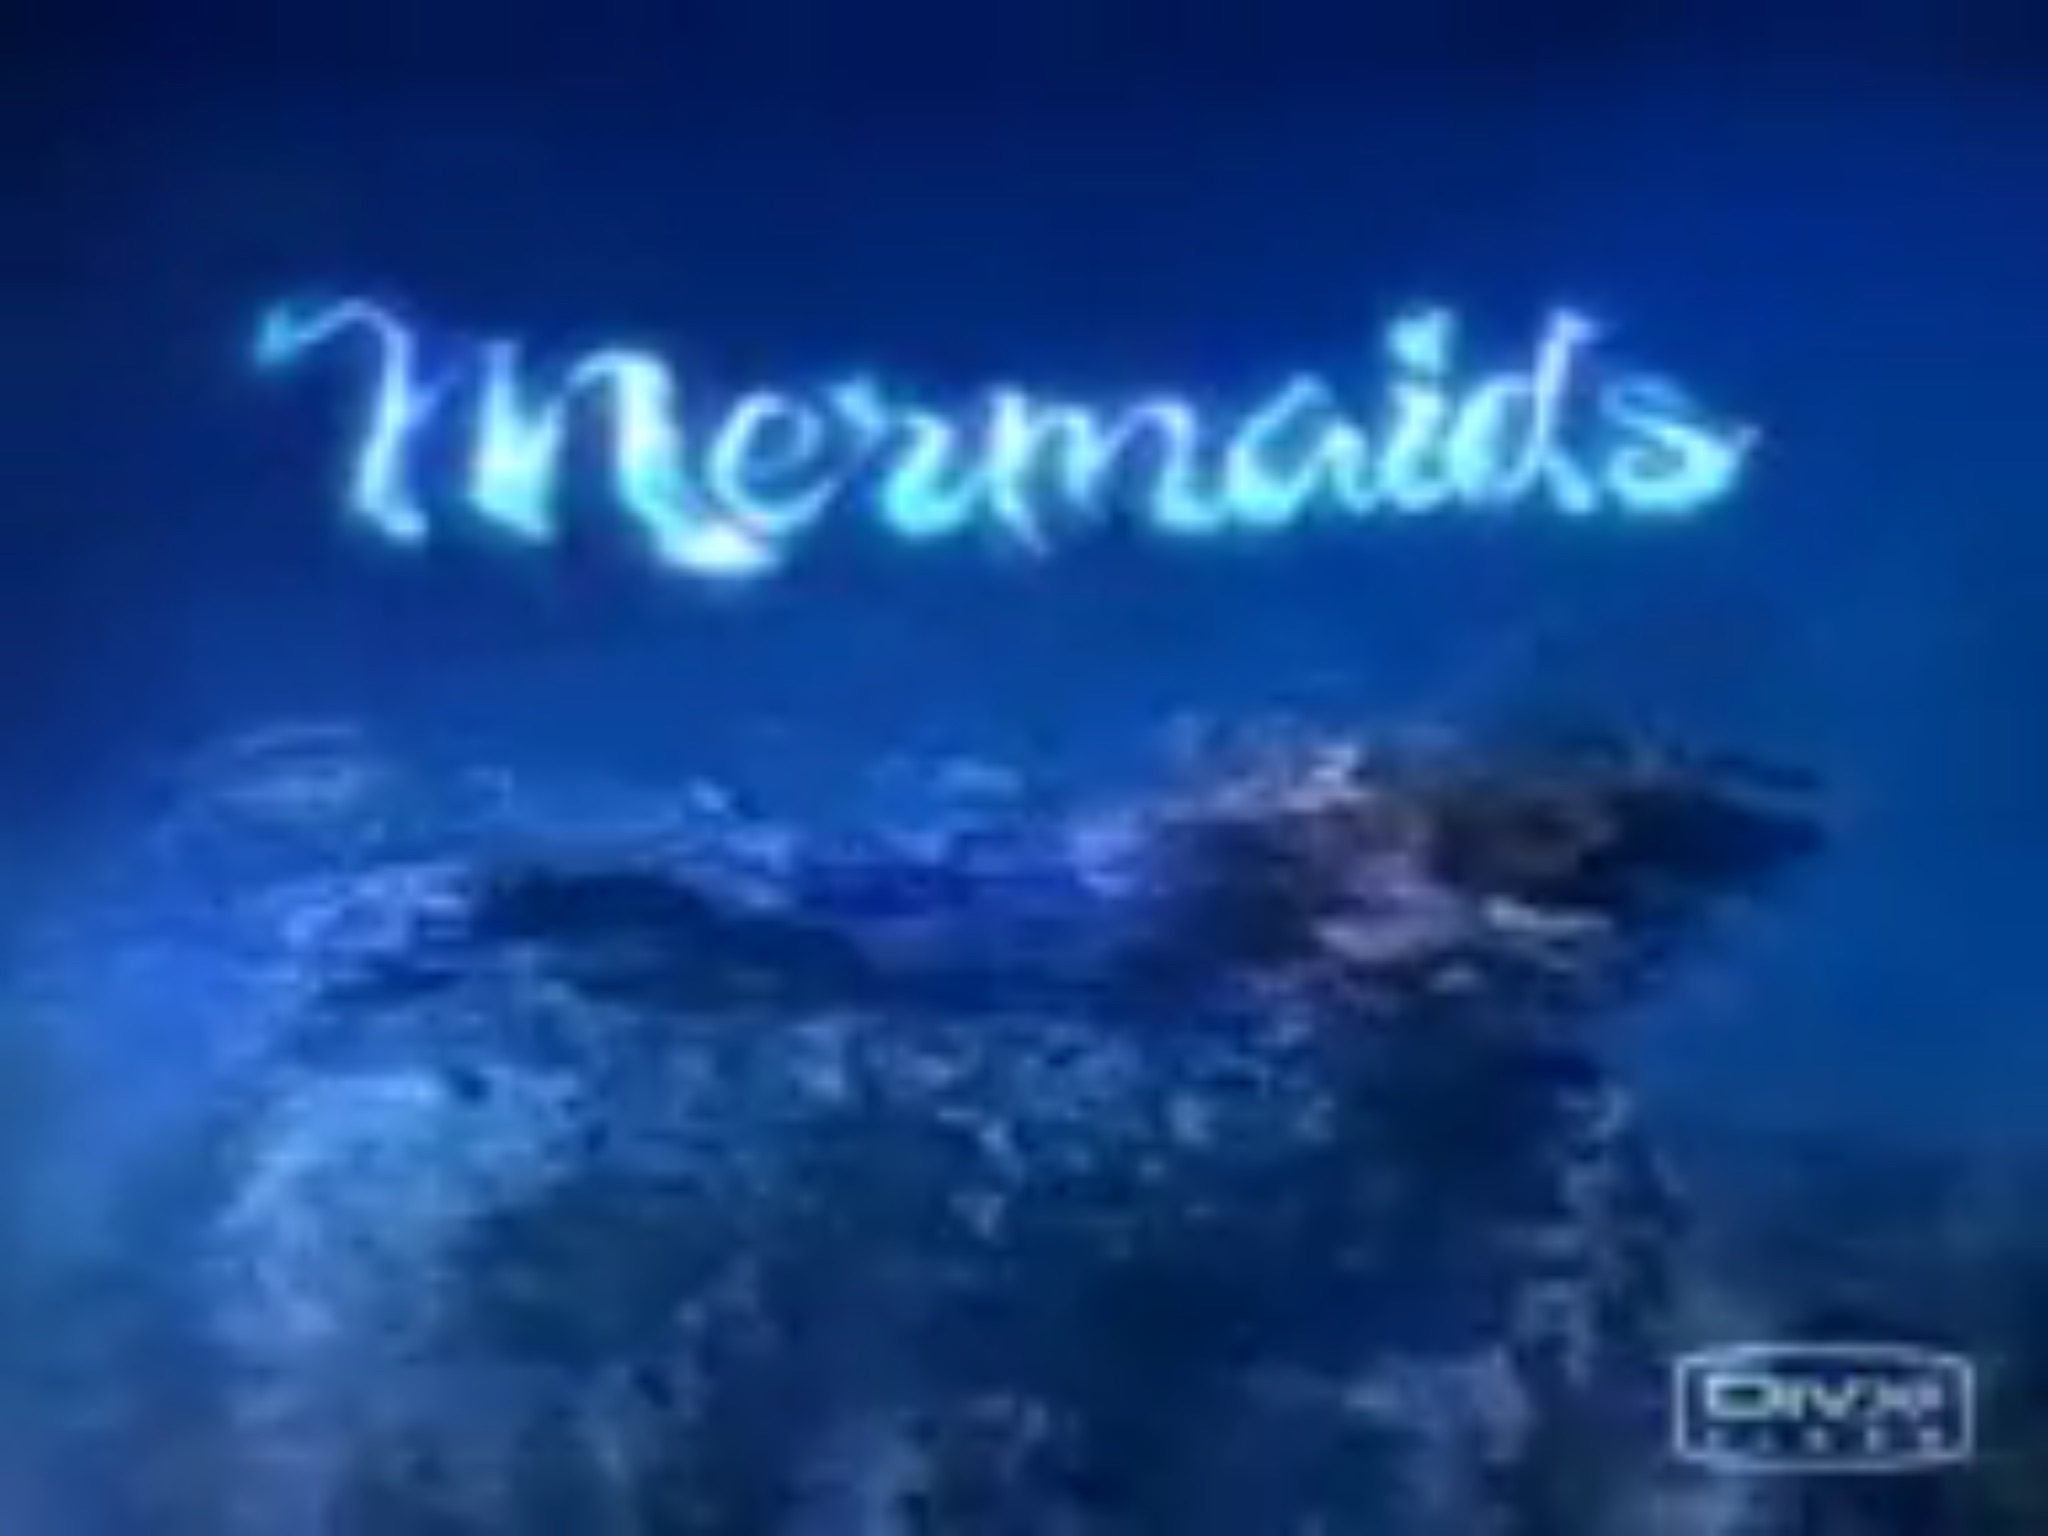  Mermaids! That's really my passion.